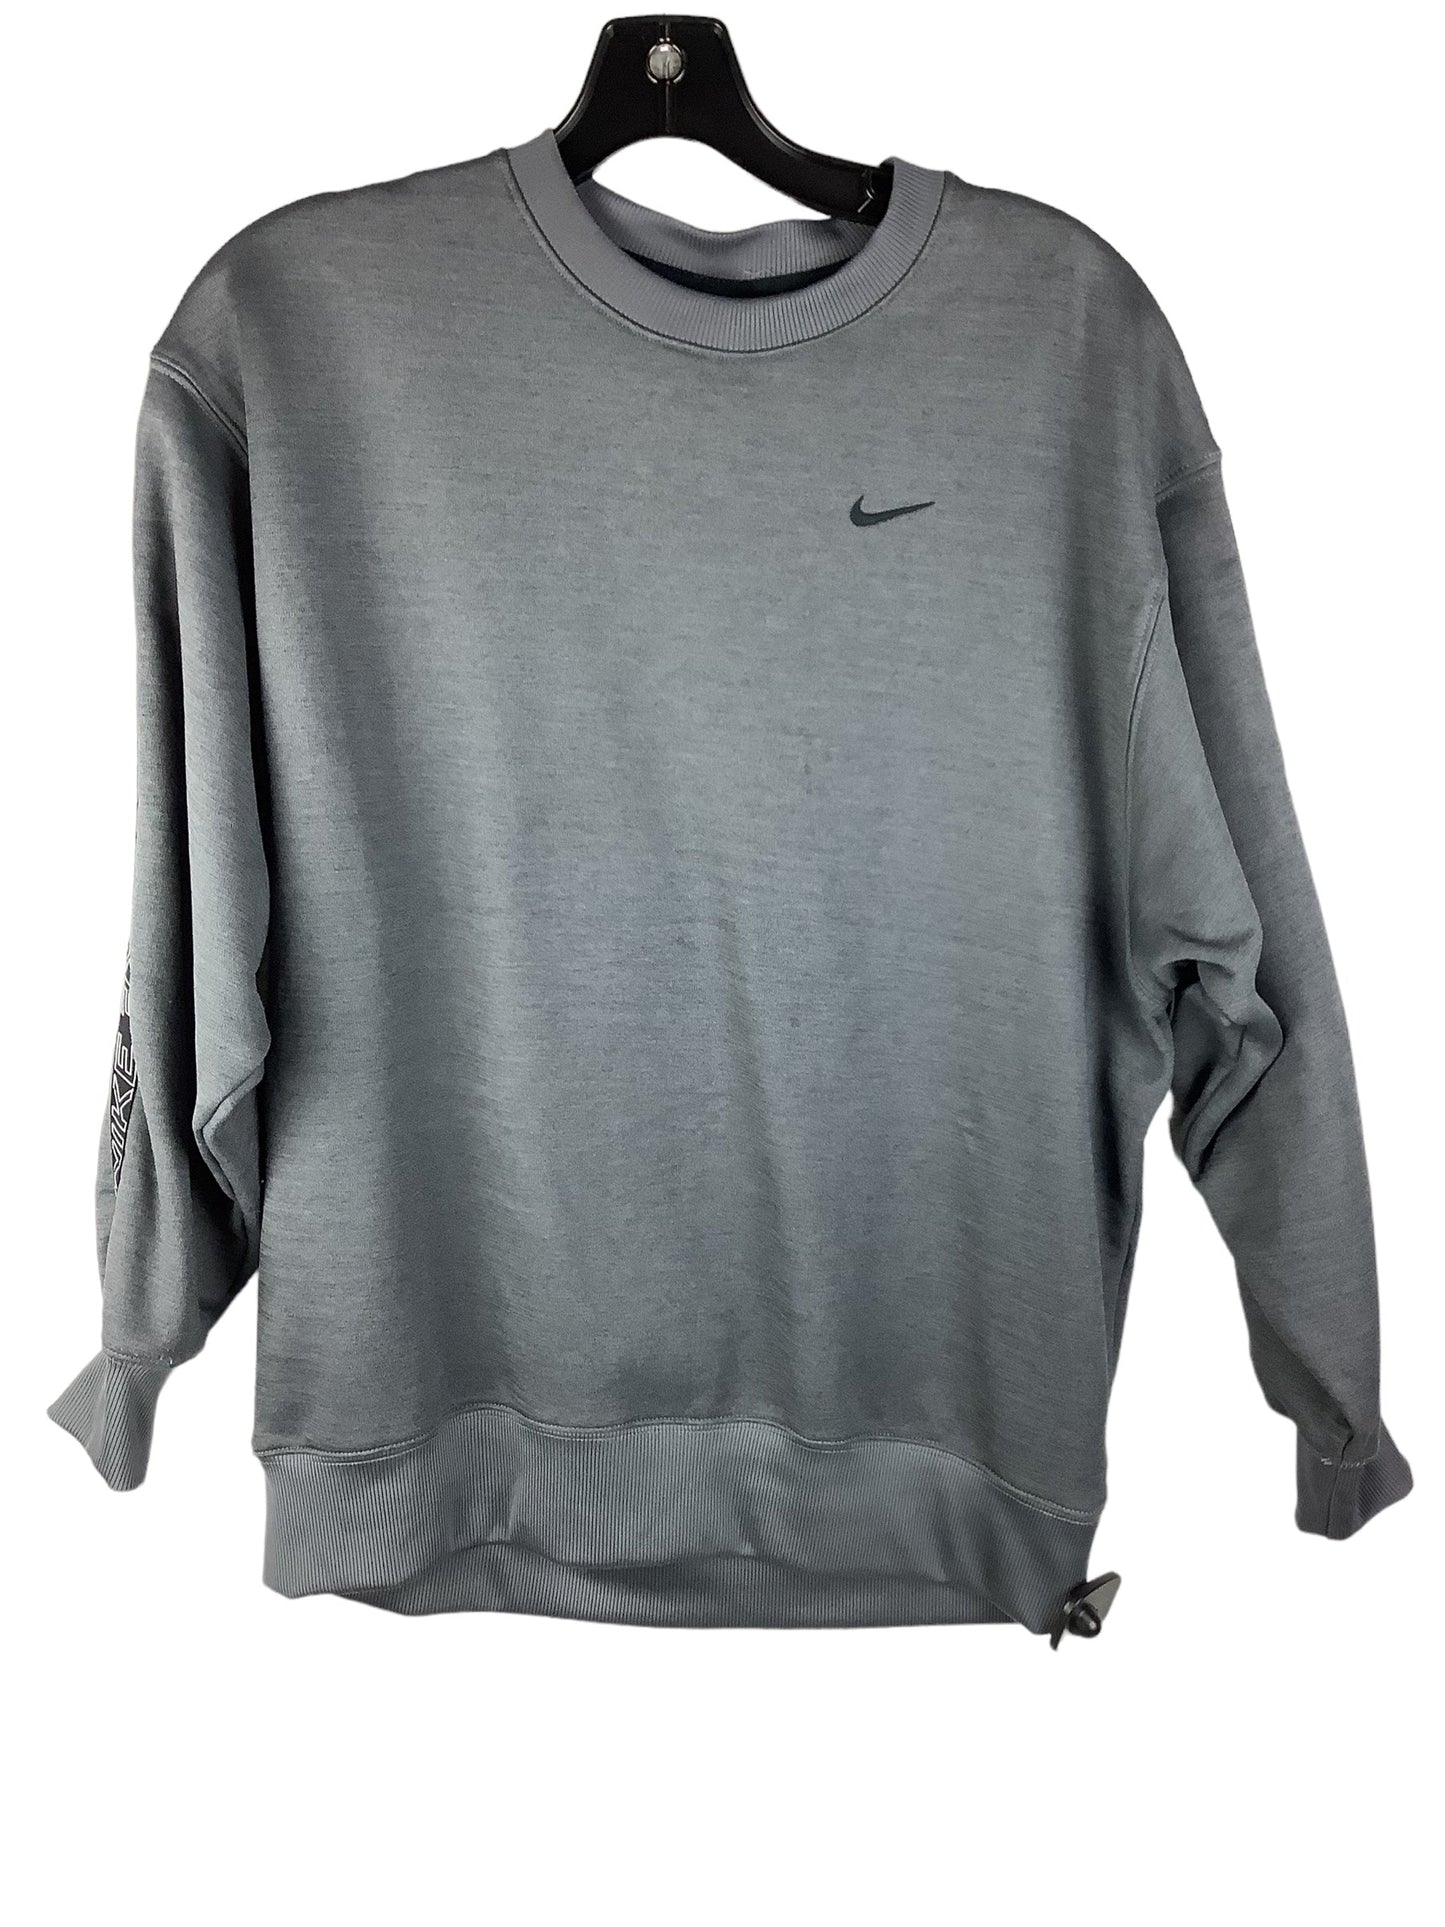 Athletic Top Long Sleeve Crewneck By Nike  Size: S